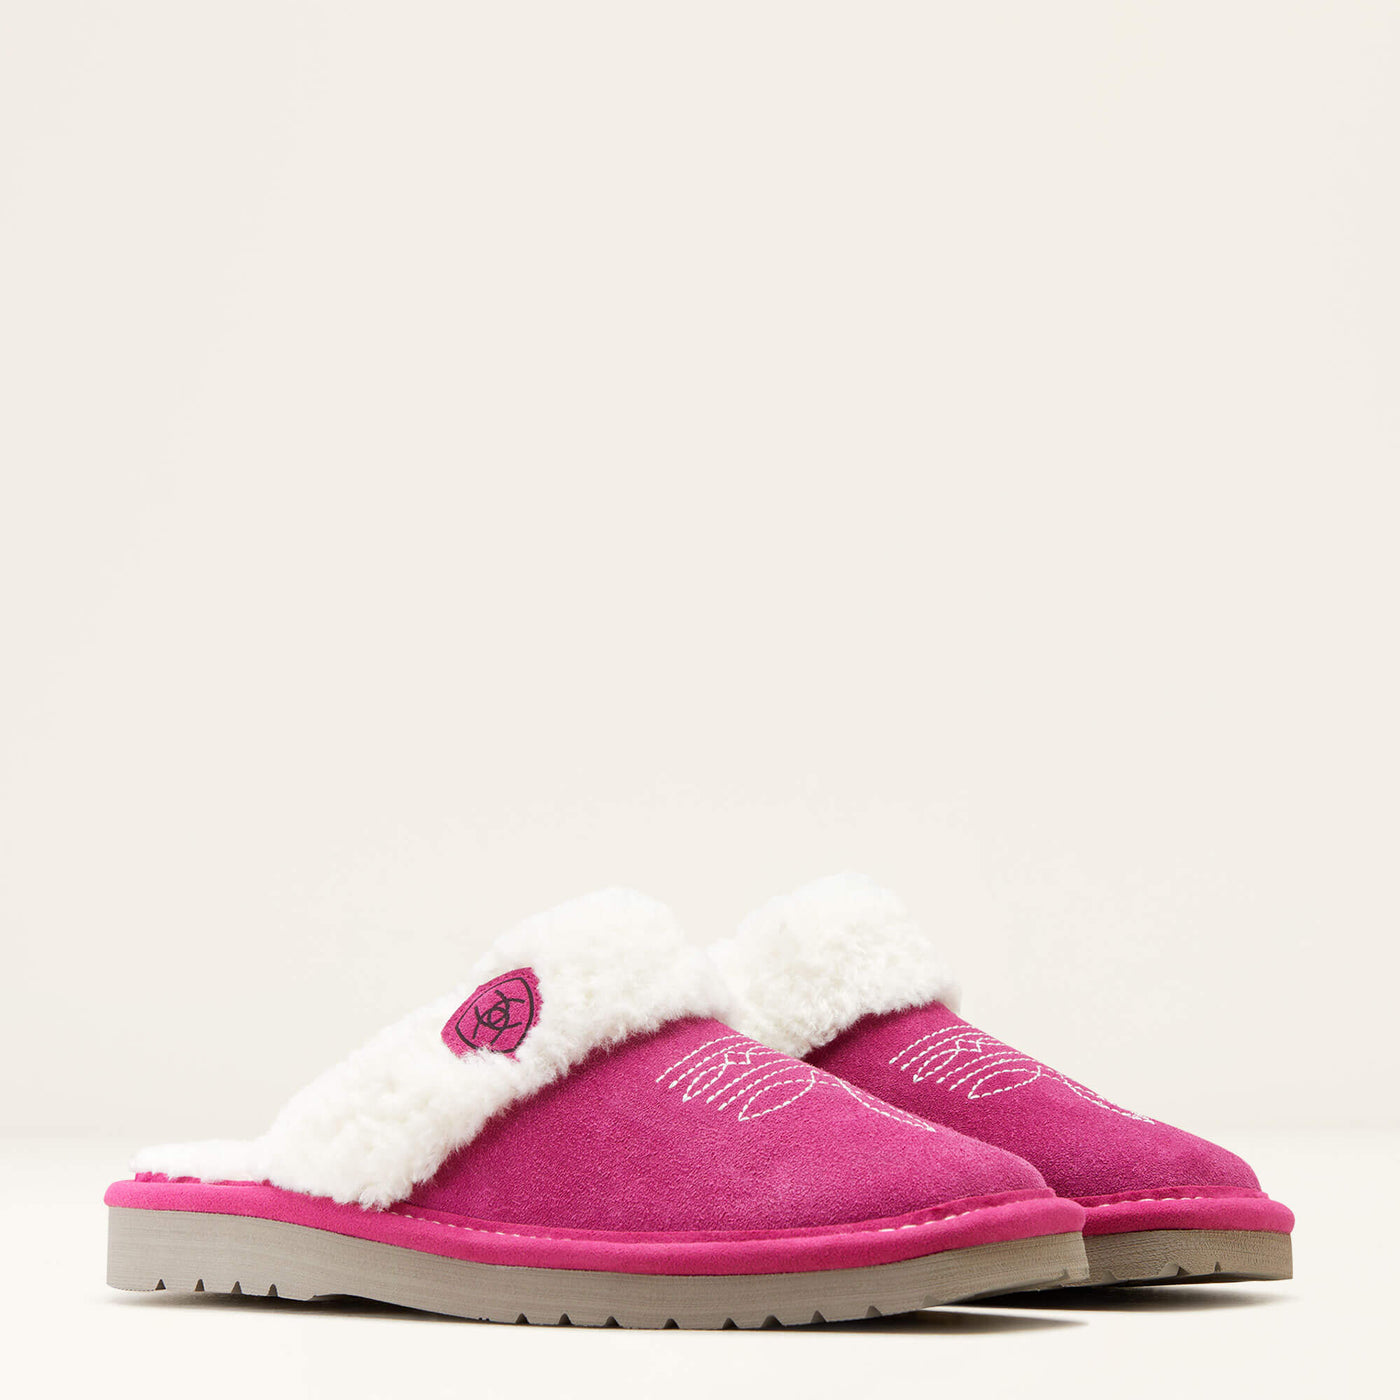 Jackie Square Toe Slipper - Very Berry Pink - Ariat